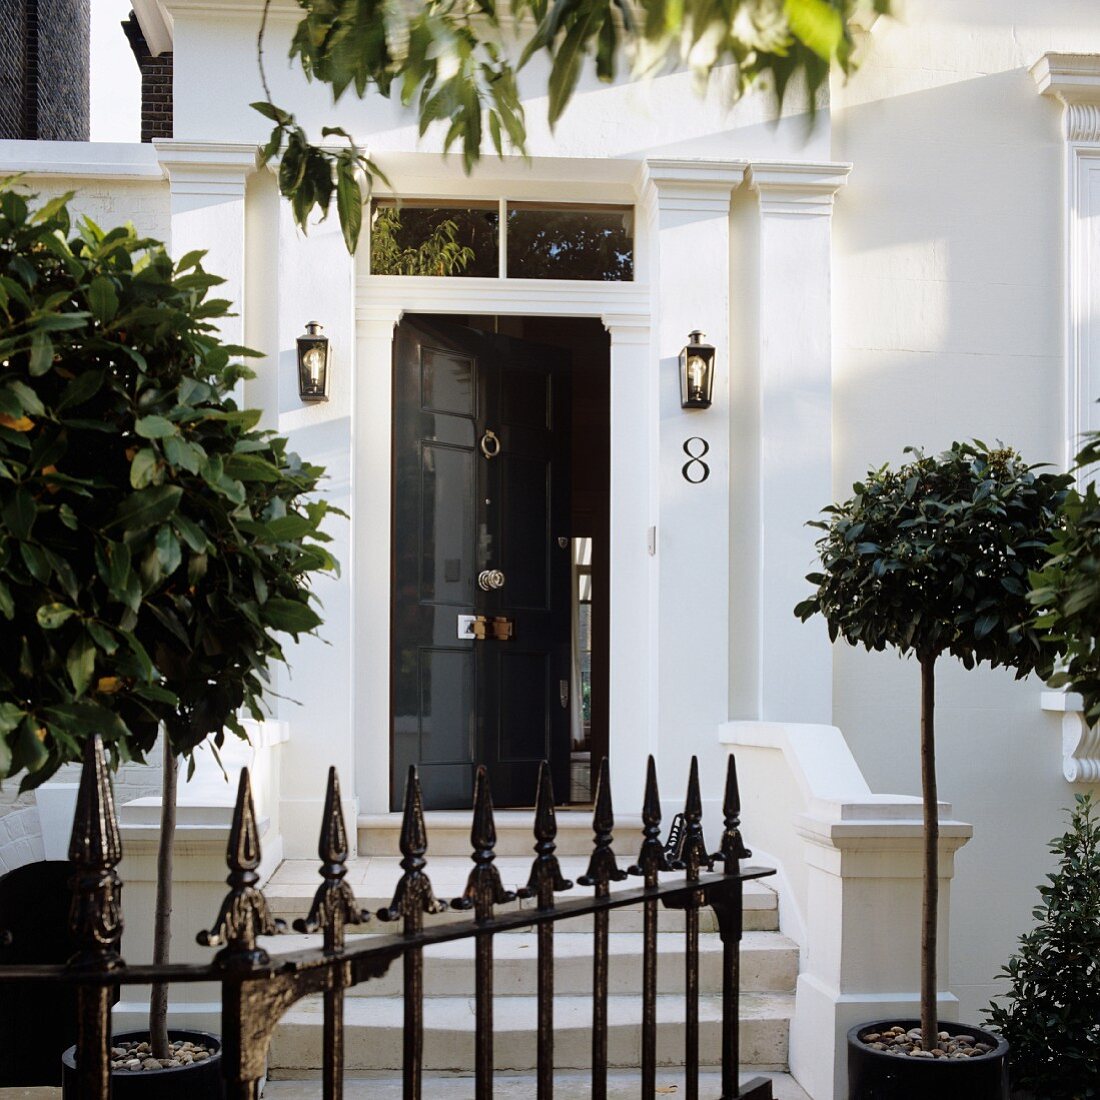 Wrought iron gate and small bay trees in front of traditional, English house